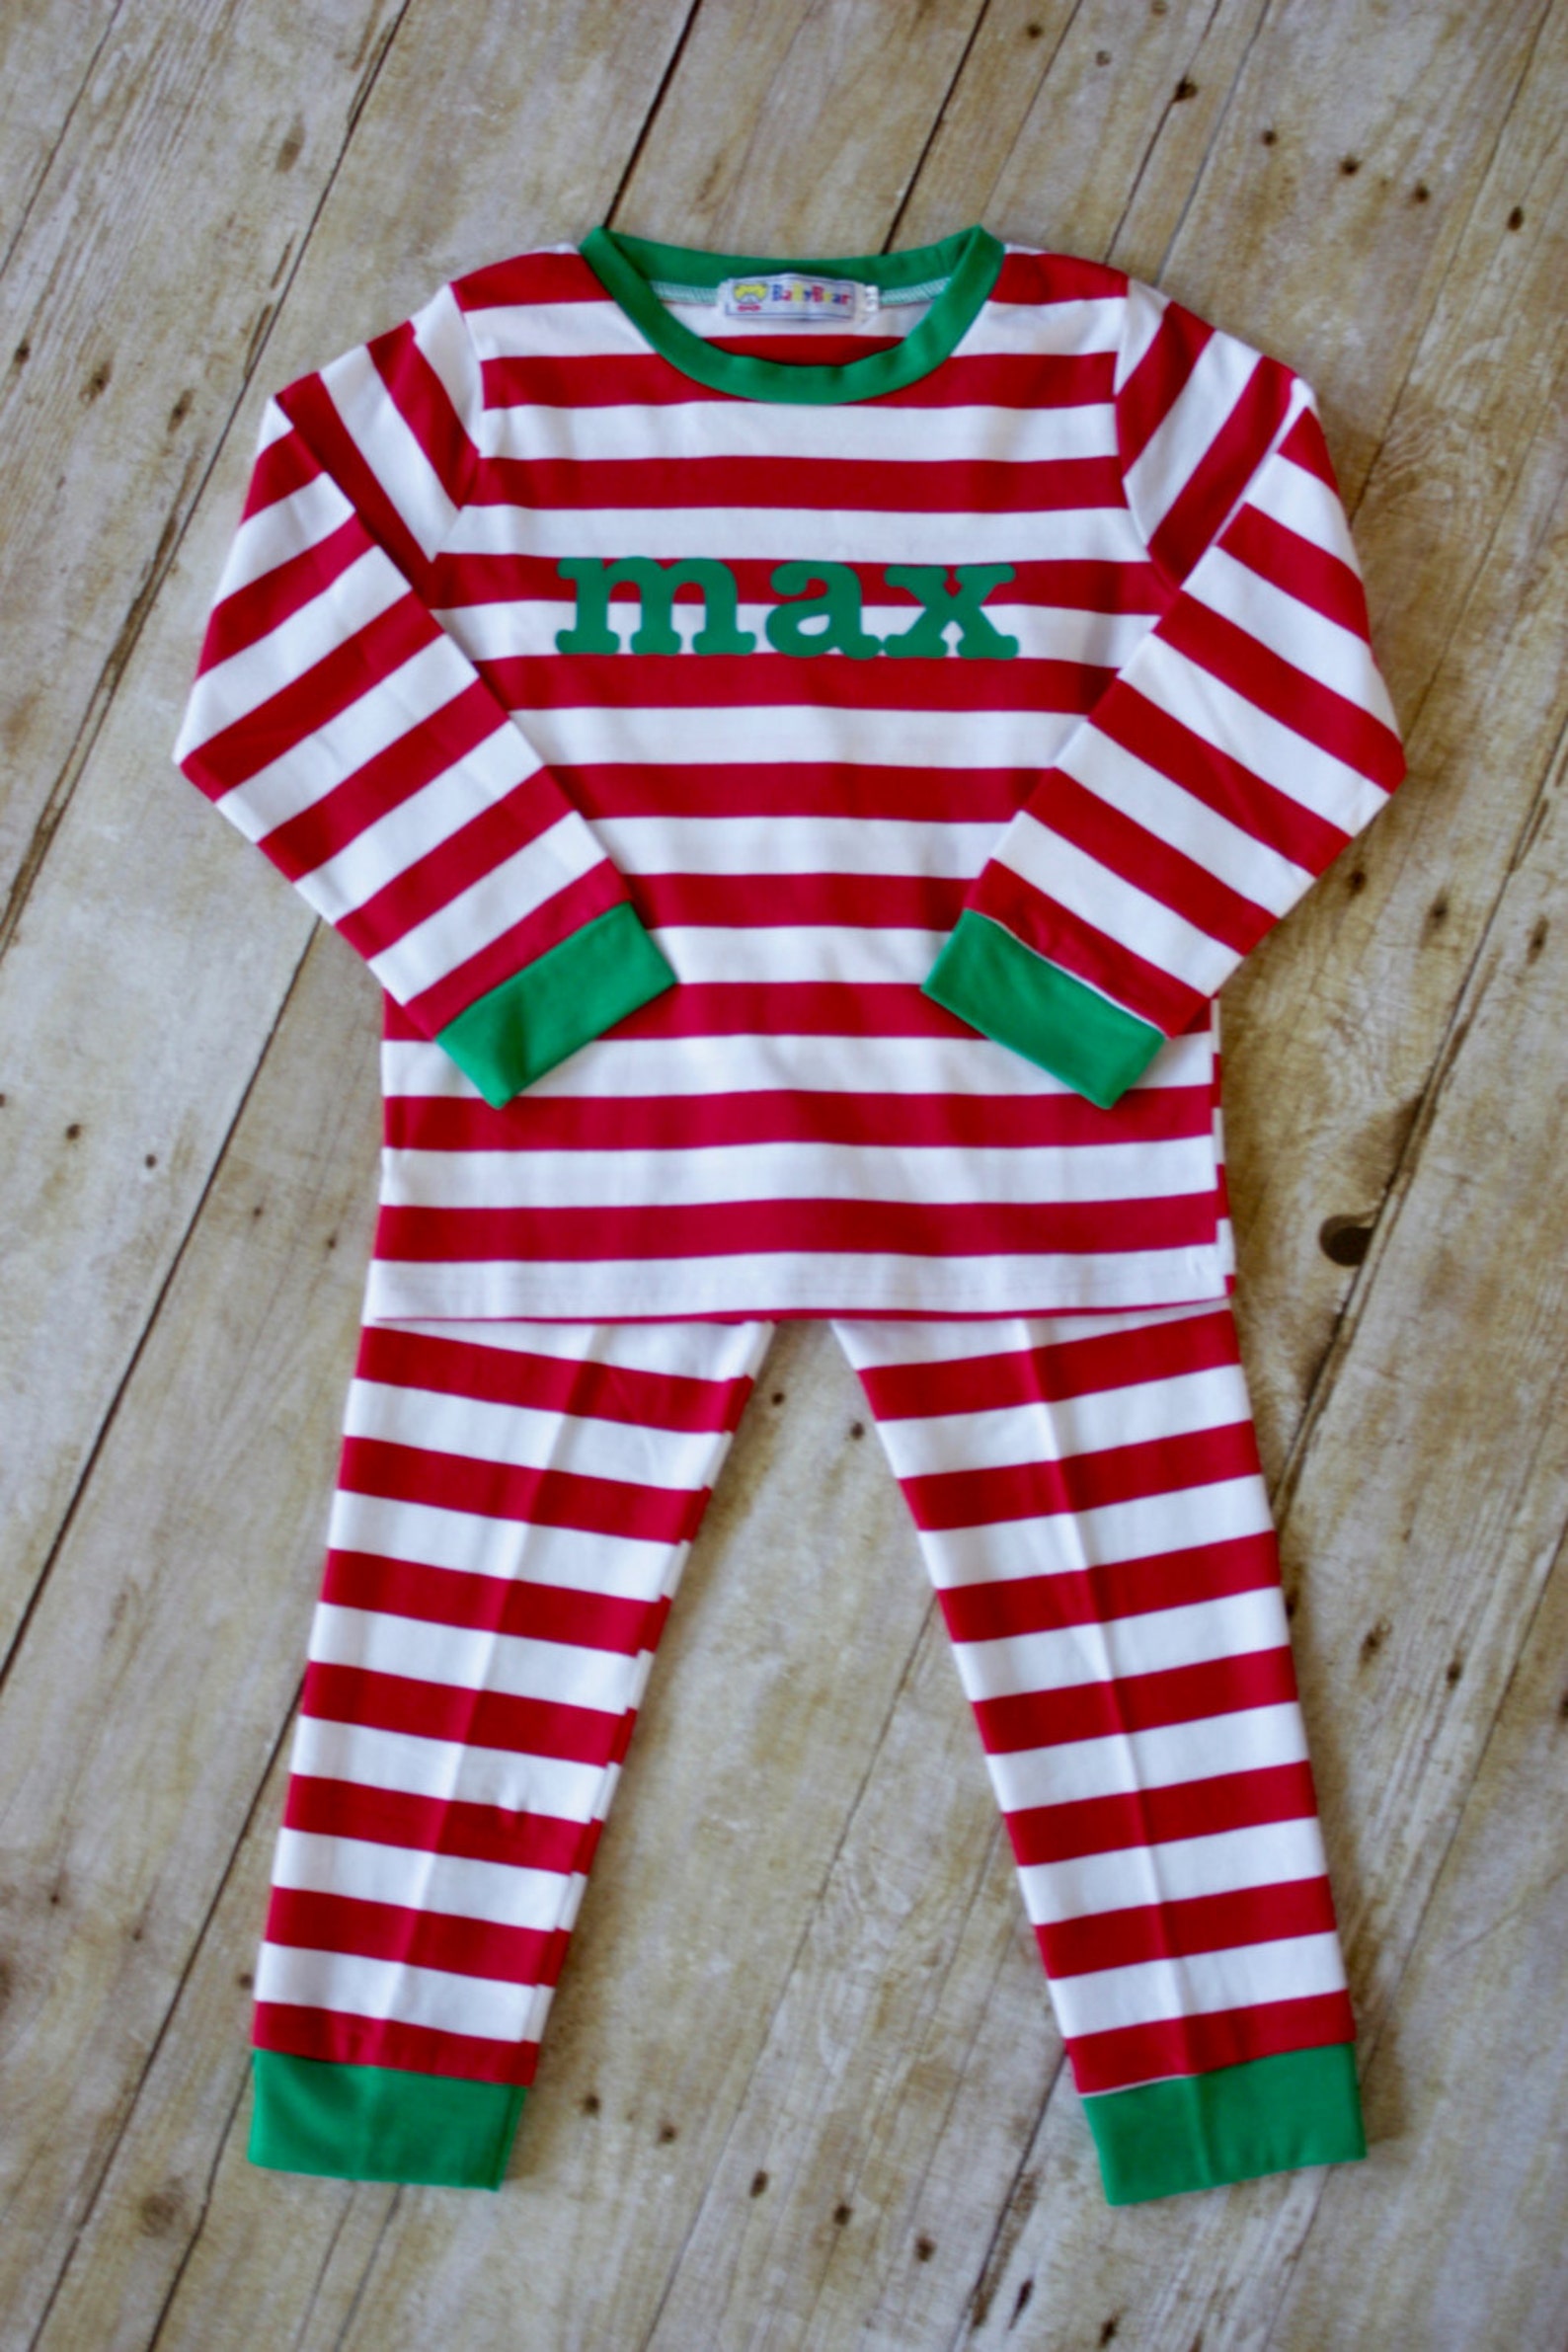 RED striped Christmas pajamas for kids-personalized | Etsy